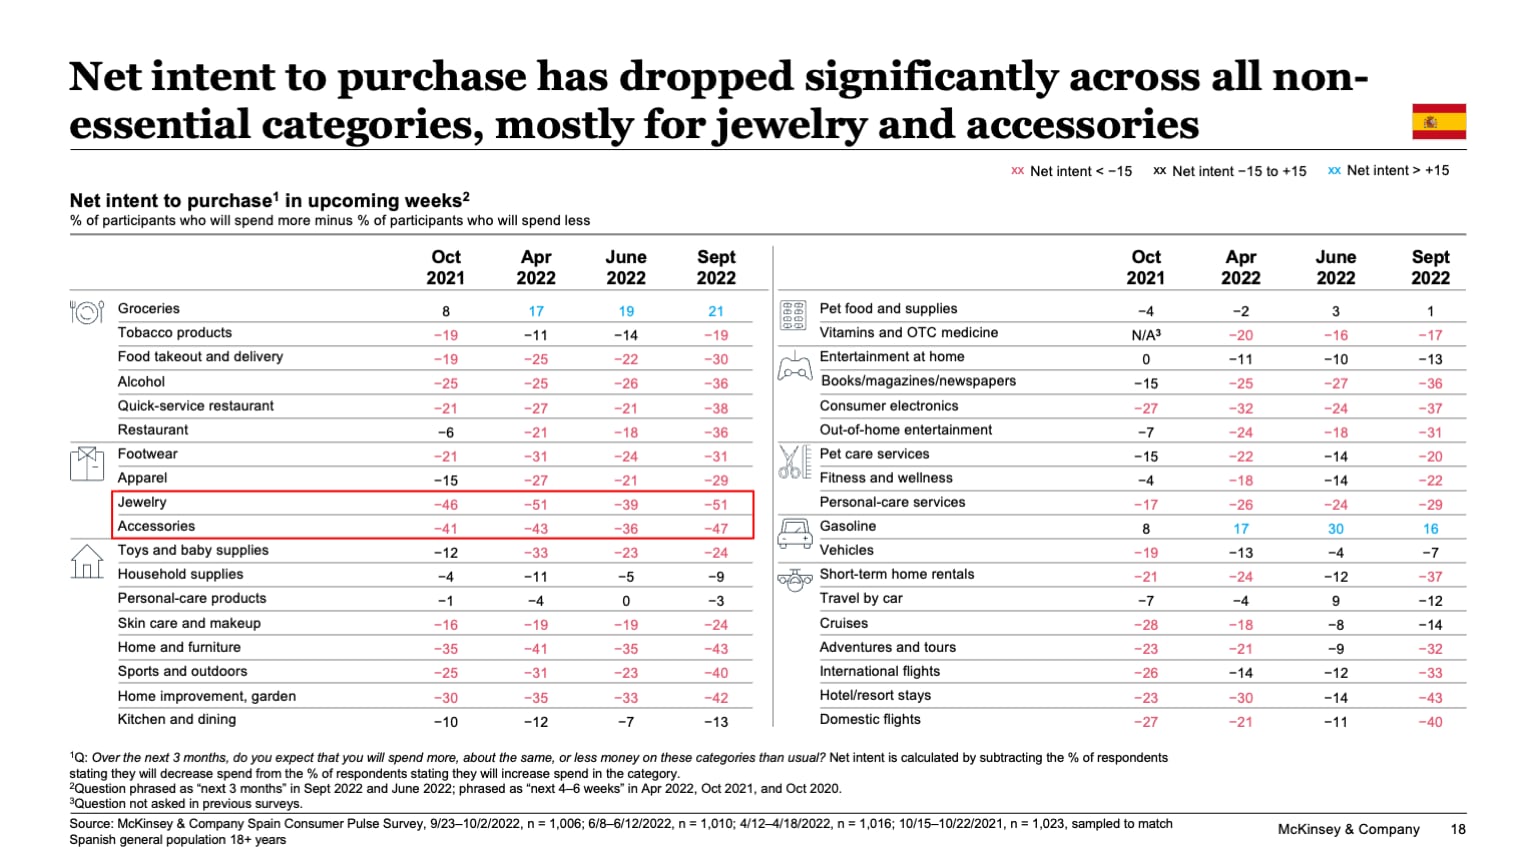 Net intent to purchase has dropped significantly across all non-essential categories, mostly for jewelry and accessories